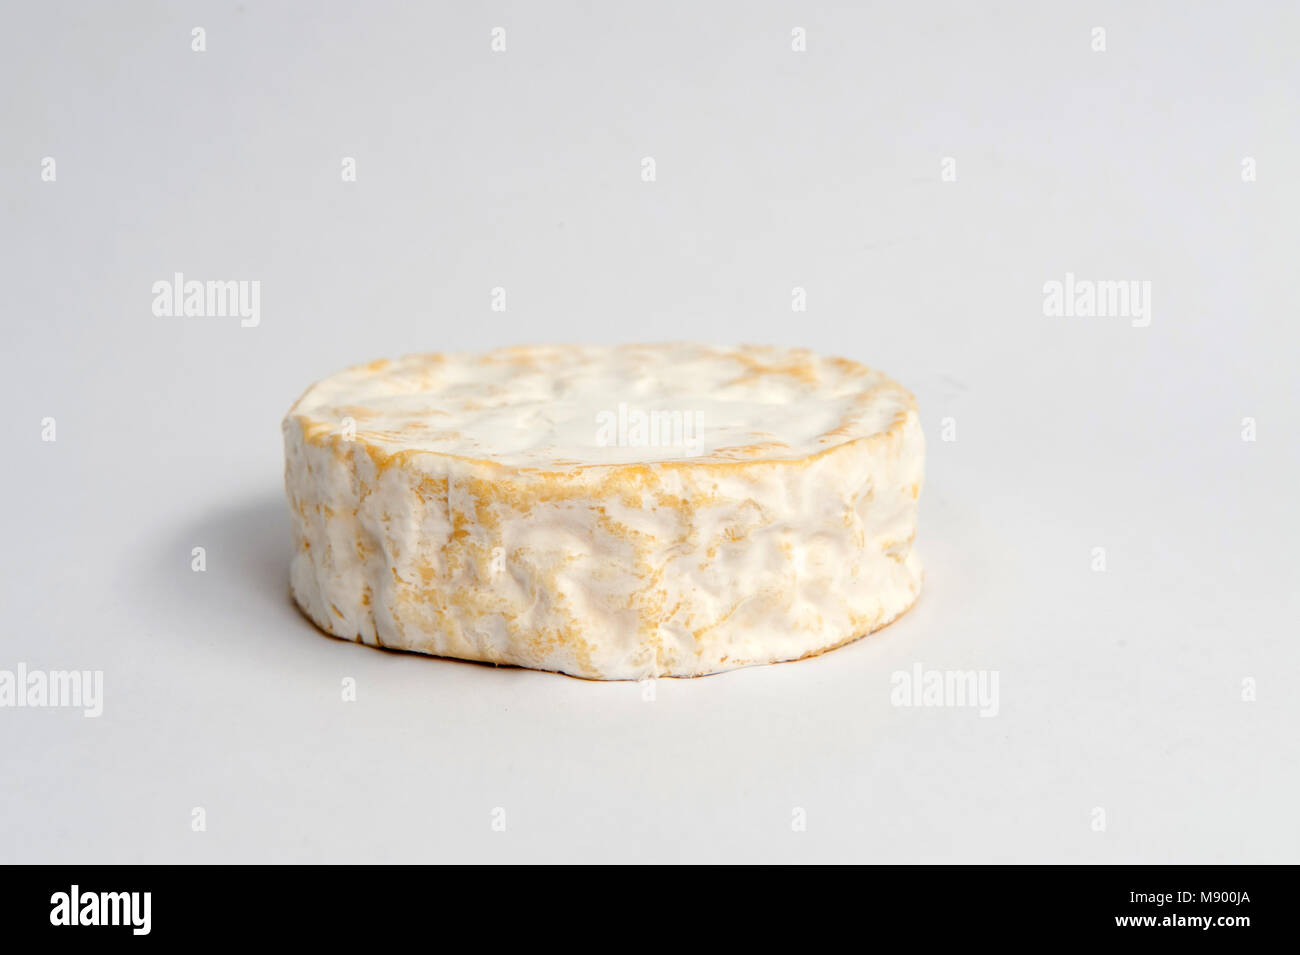 Tunworth a camembert-style cheese from the British Isles Stock Photo